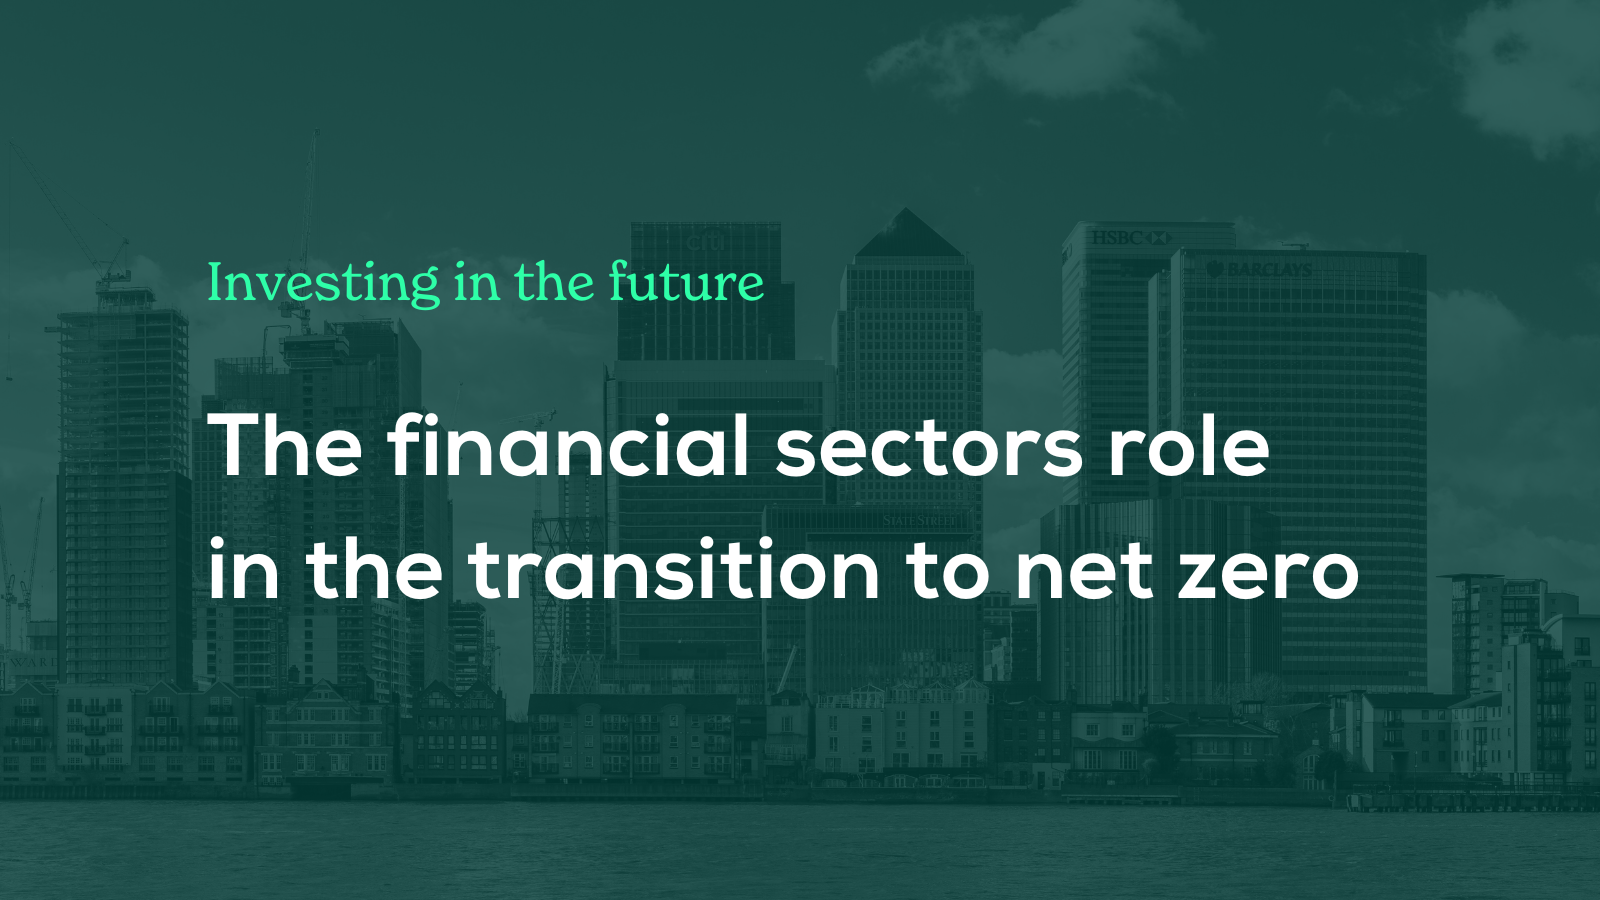 Investing in the future: The financial sectors role in the transition to net zero